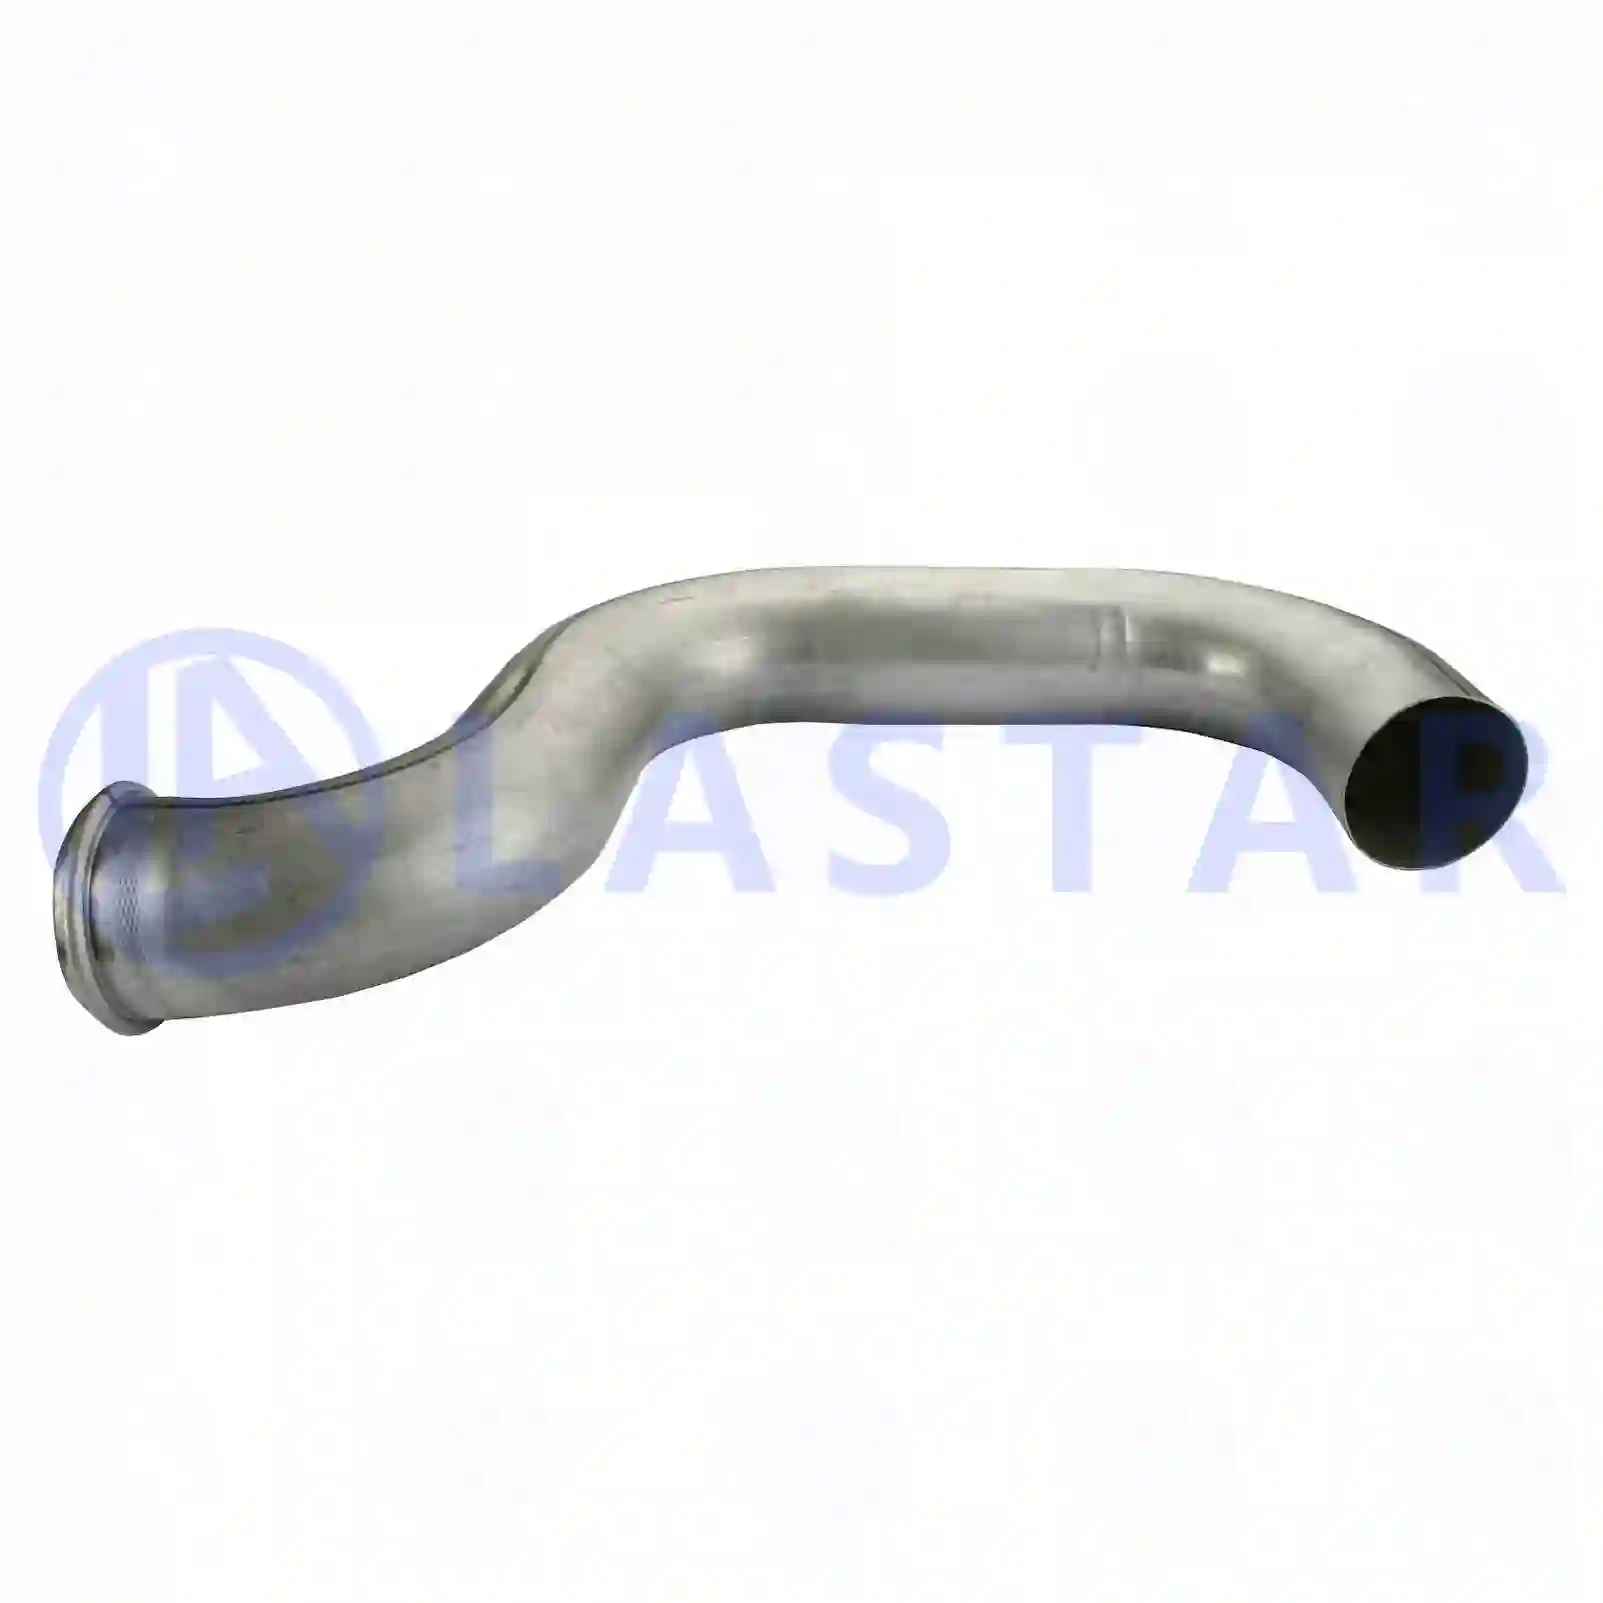 Exhaust pipe, 77706836, 1628052, 20429020, 20535530 ||  77706836 Lastar Spare Part | Truck Spare Parts, Auotomotive Spare Parts Exhaust pipe, 77706836, 1628052, 20429020, 20535530 ||  77706836 Lastar Spare Part | Truck Spare Parts, Auotomotive Spare Parts